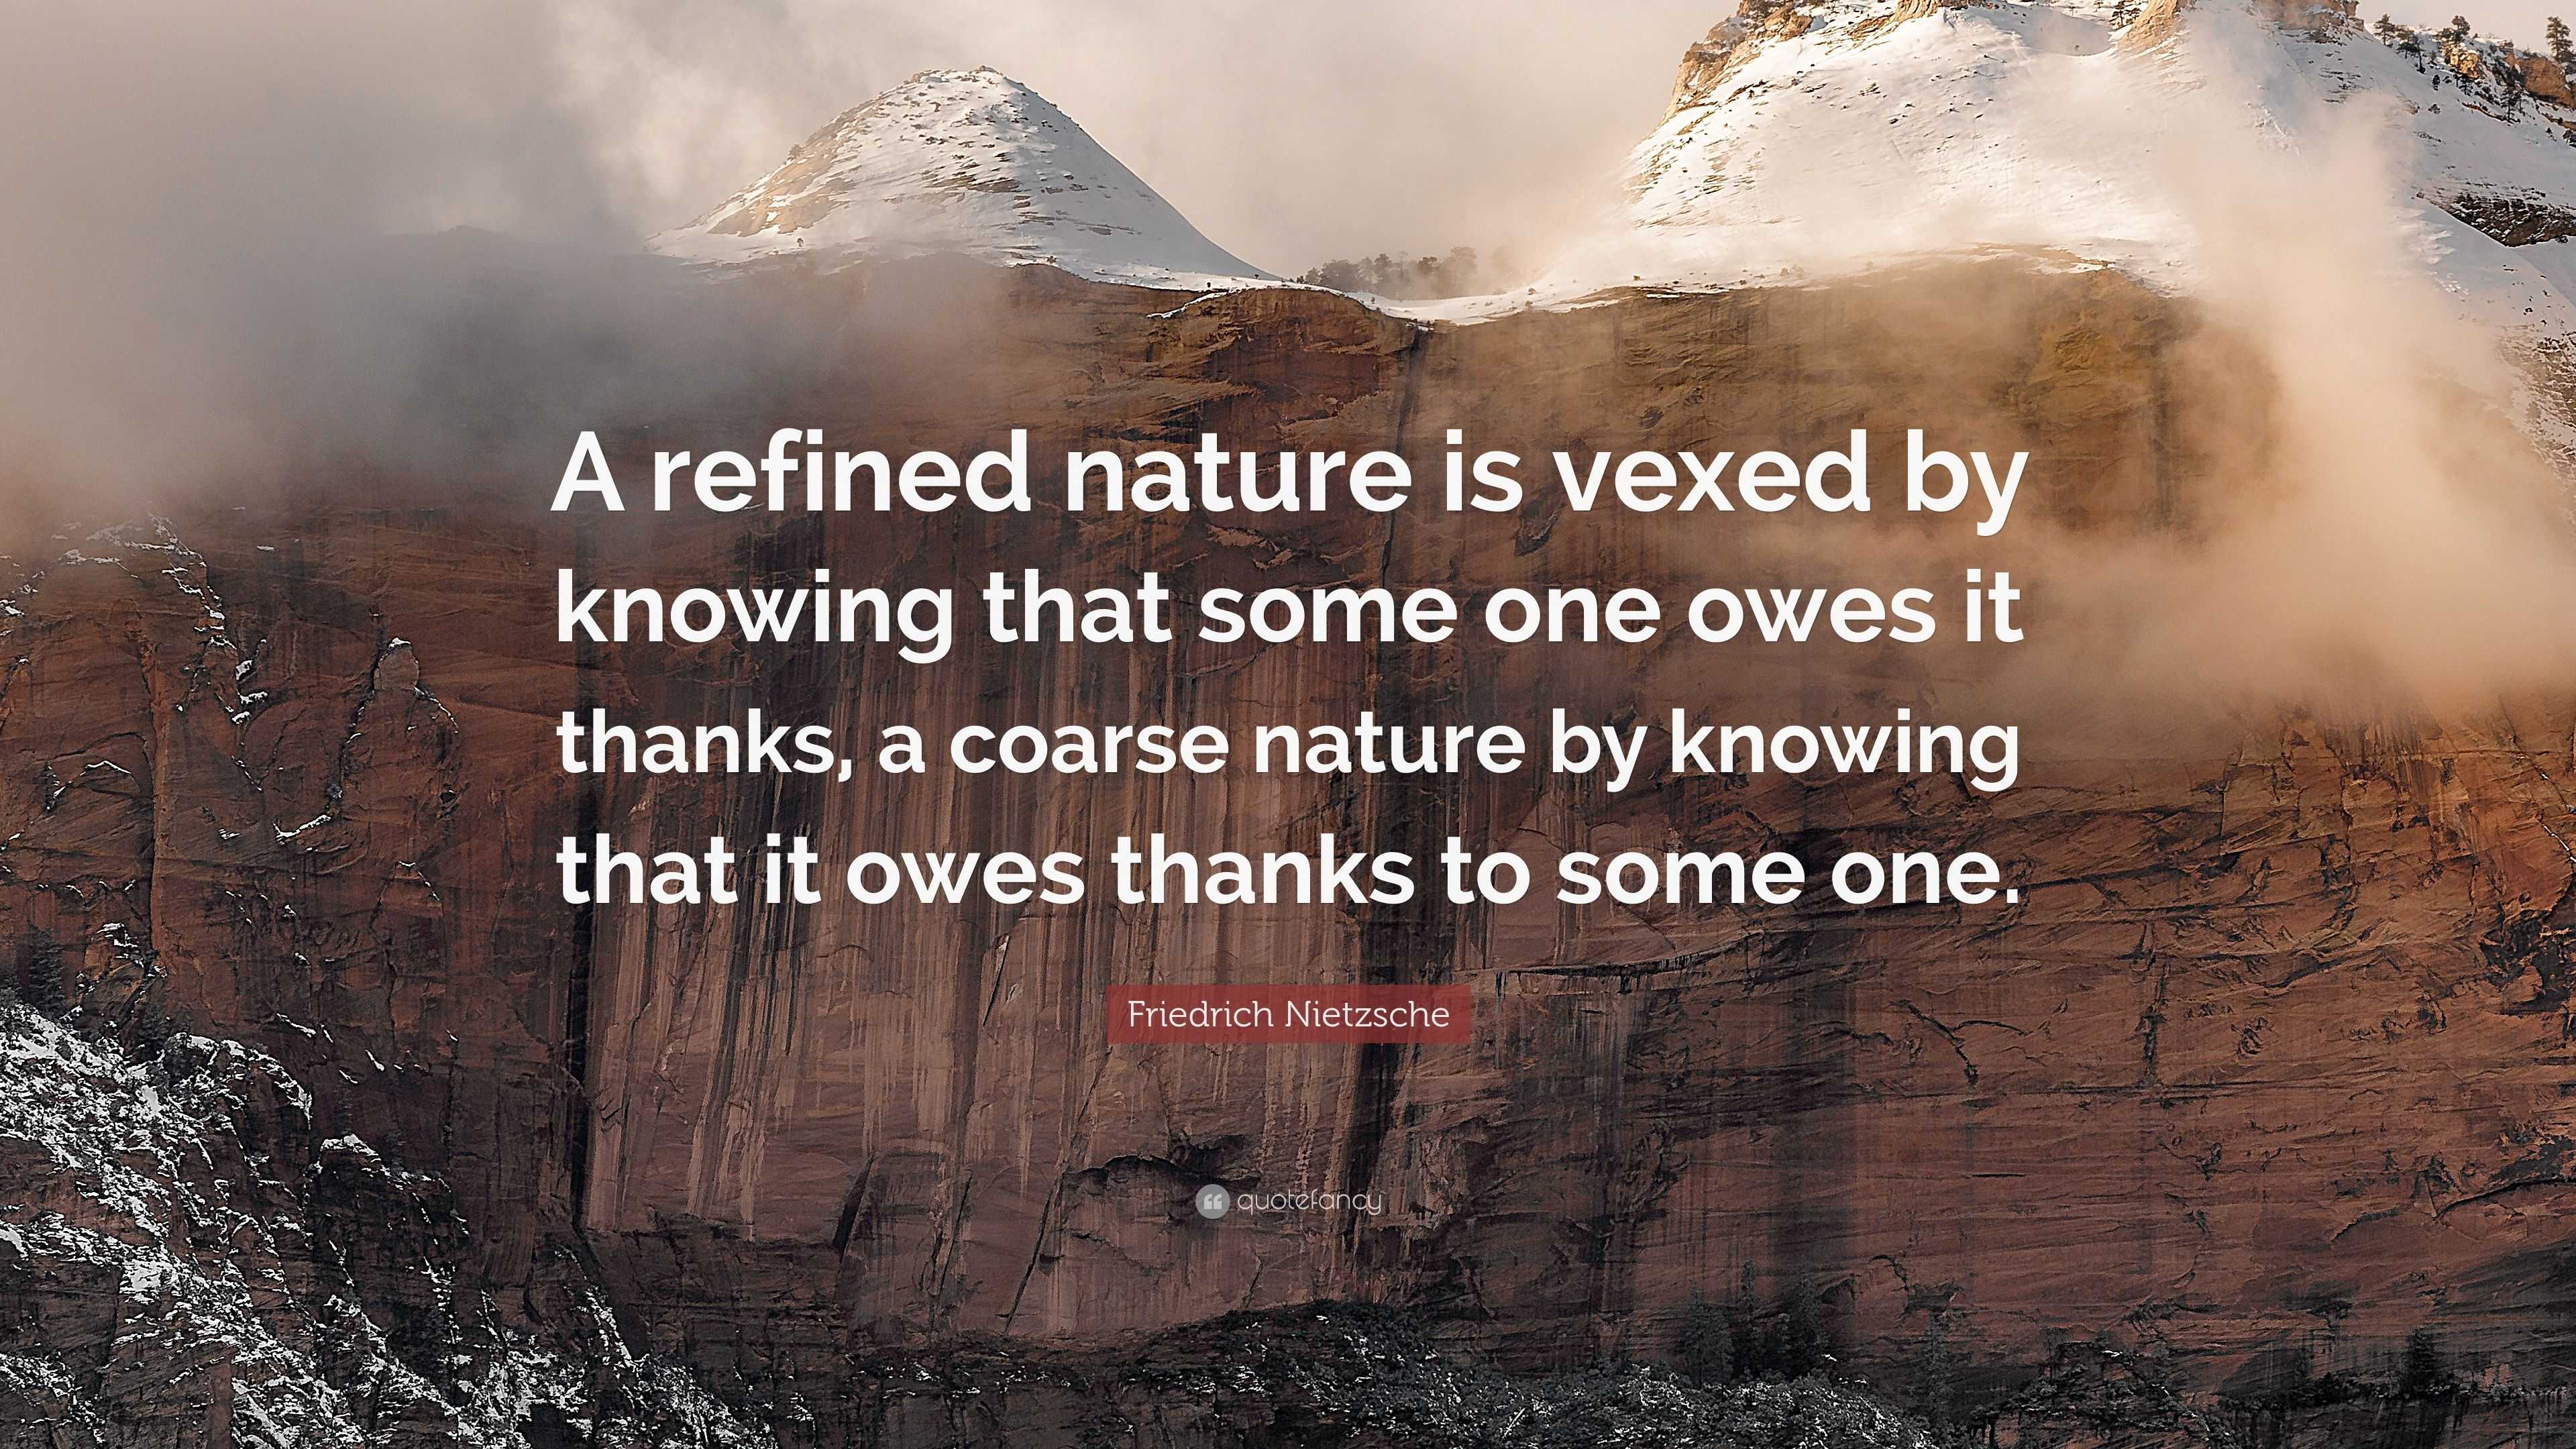 Friedrich Nietzsche Quote: “A refined nature is vexed by knowing that ...